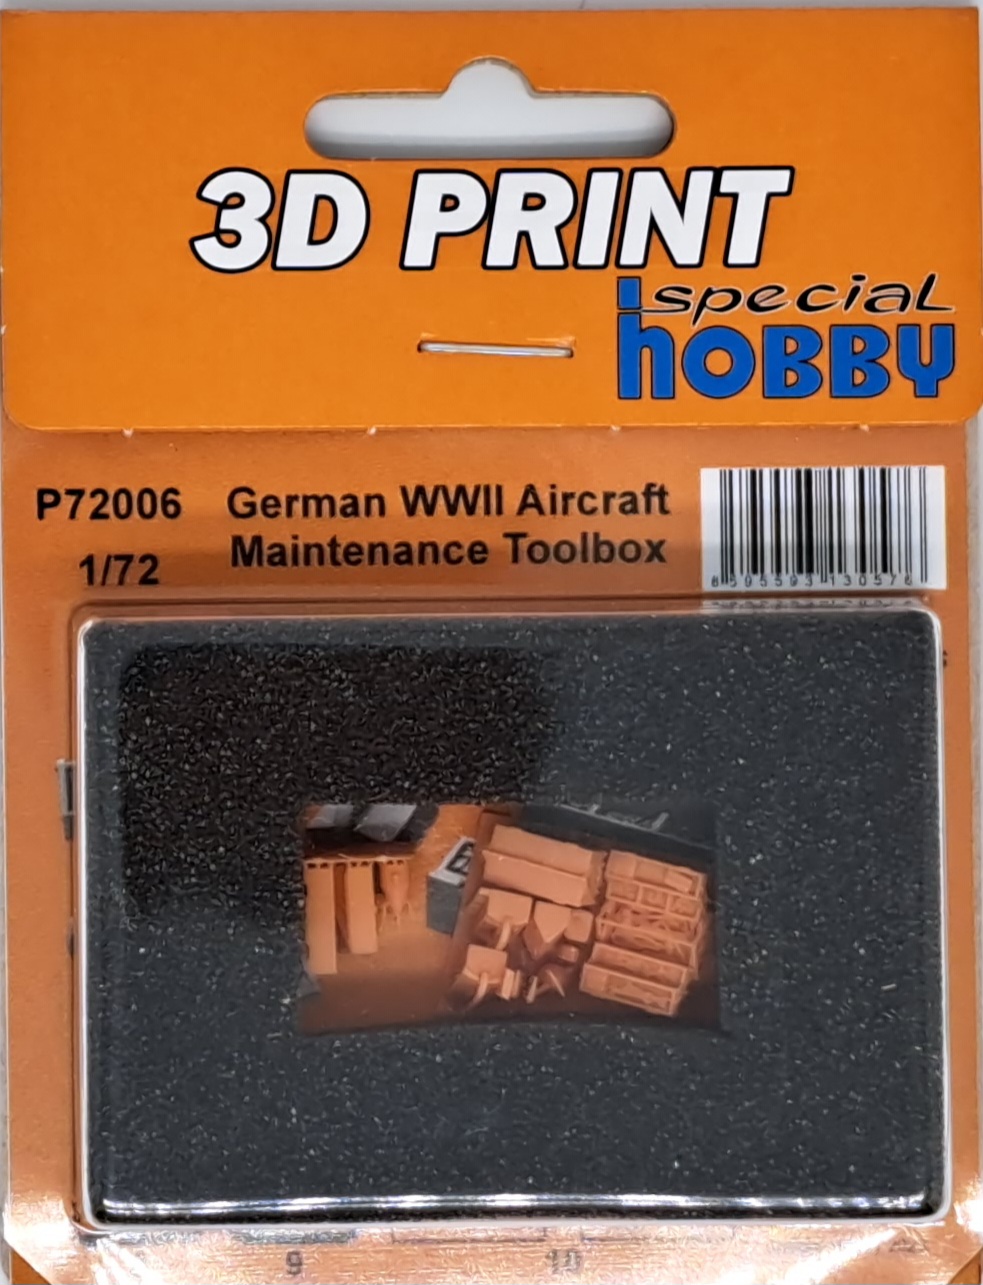 Special Hobby - German WWII Aircraft Maintanance Toolbox